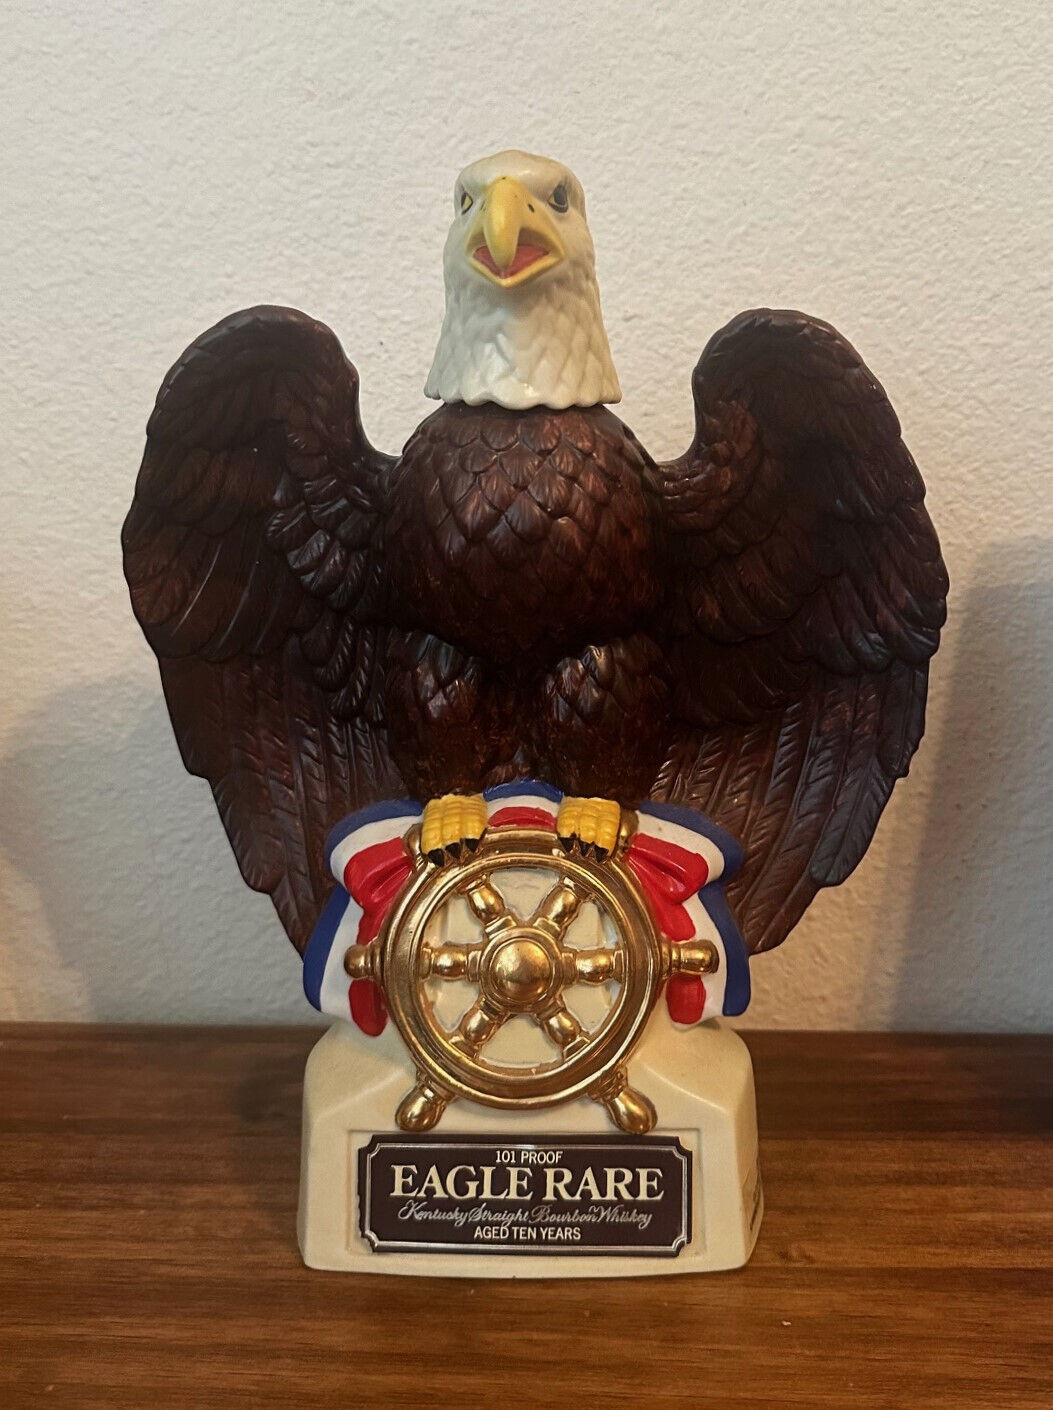 Vintage EAGLE RARE Whiskey Decanter- Bald Eagle, #4 in Series, 1982